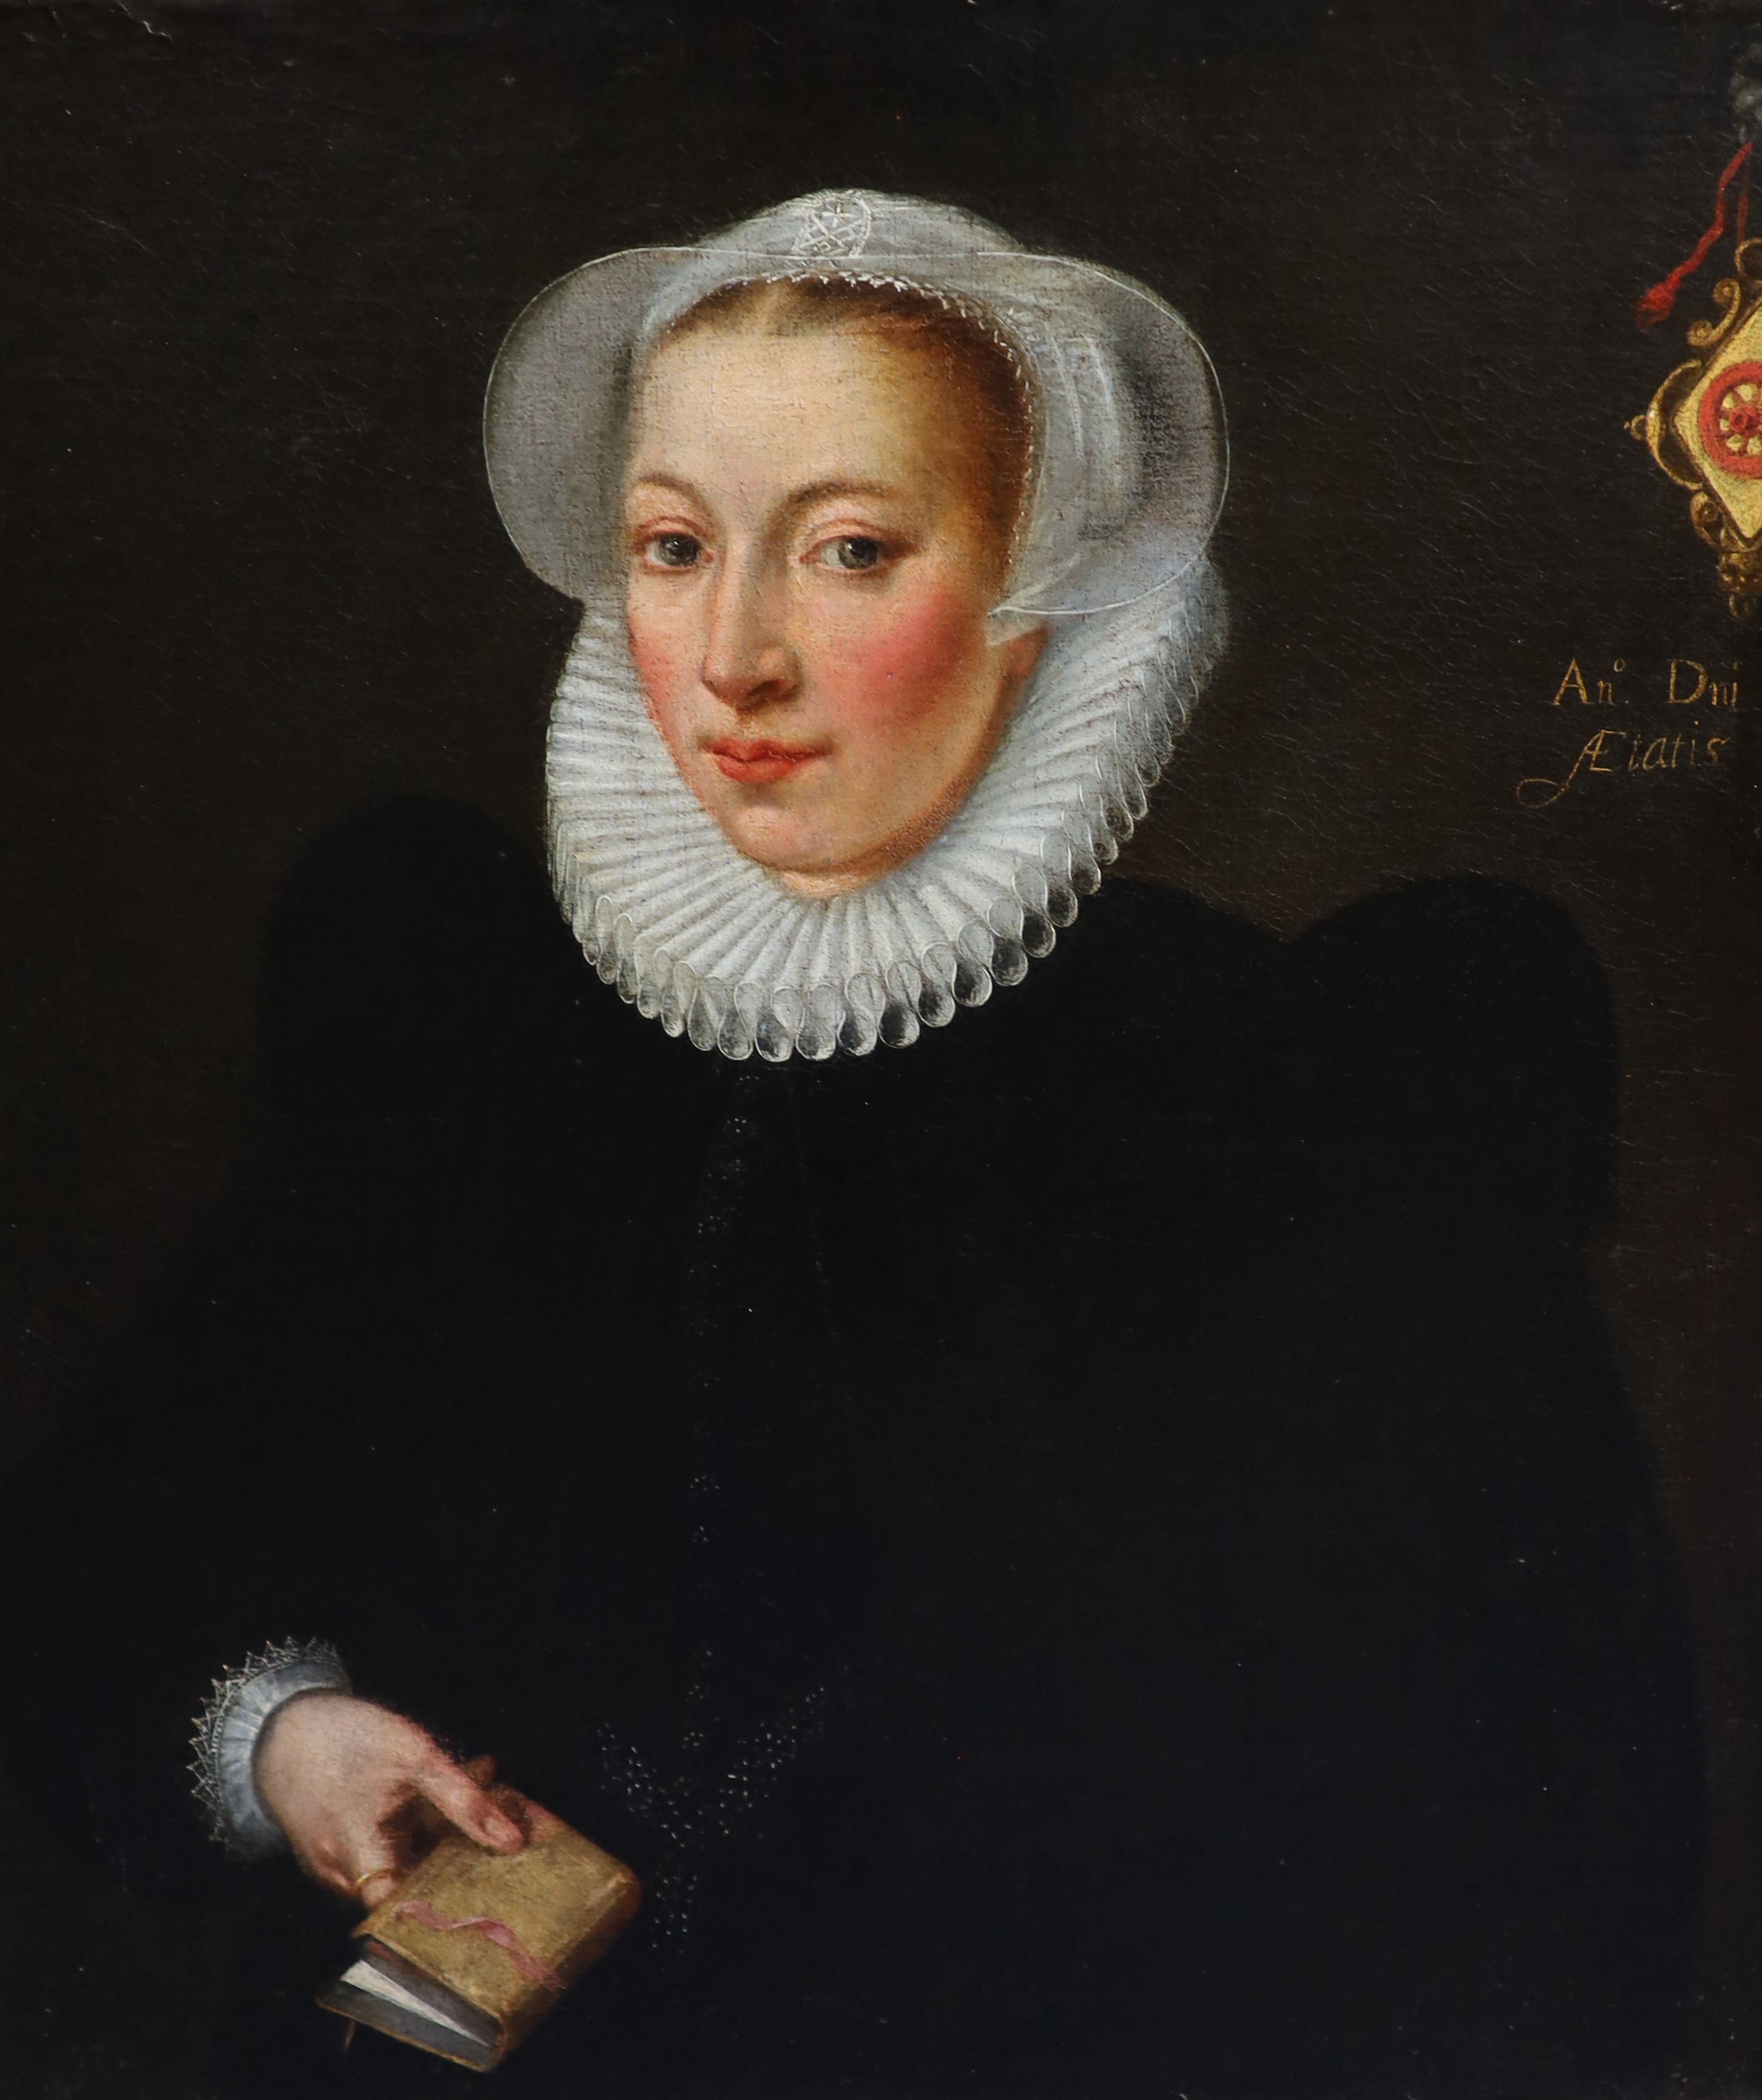 Follower of Goerztius Geldorp (1553-1618), Portrait of a Lady Aged 38, dated 1625, oil on canvas, 77.5 x 65cm